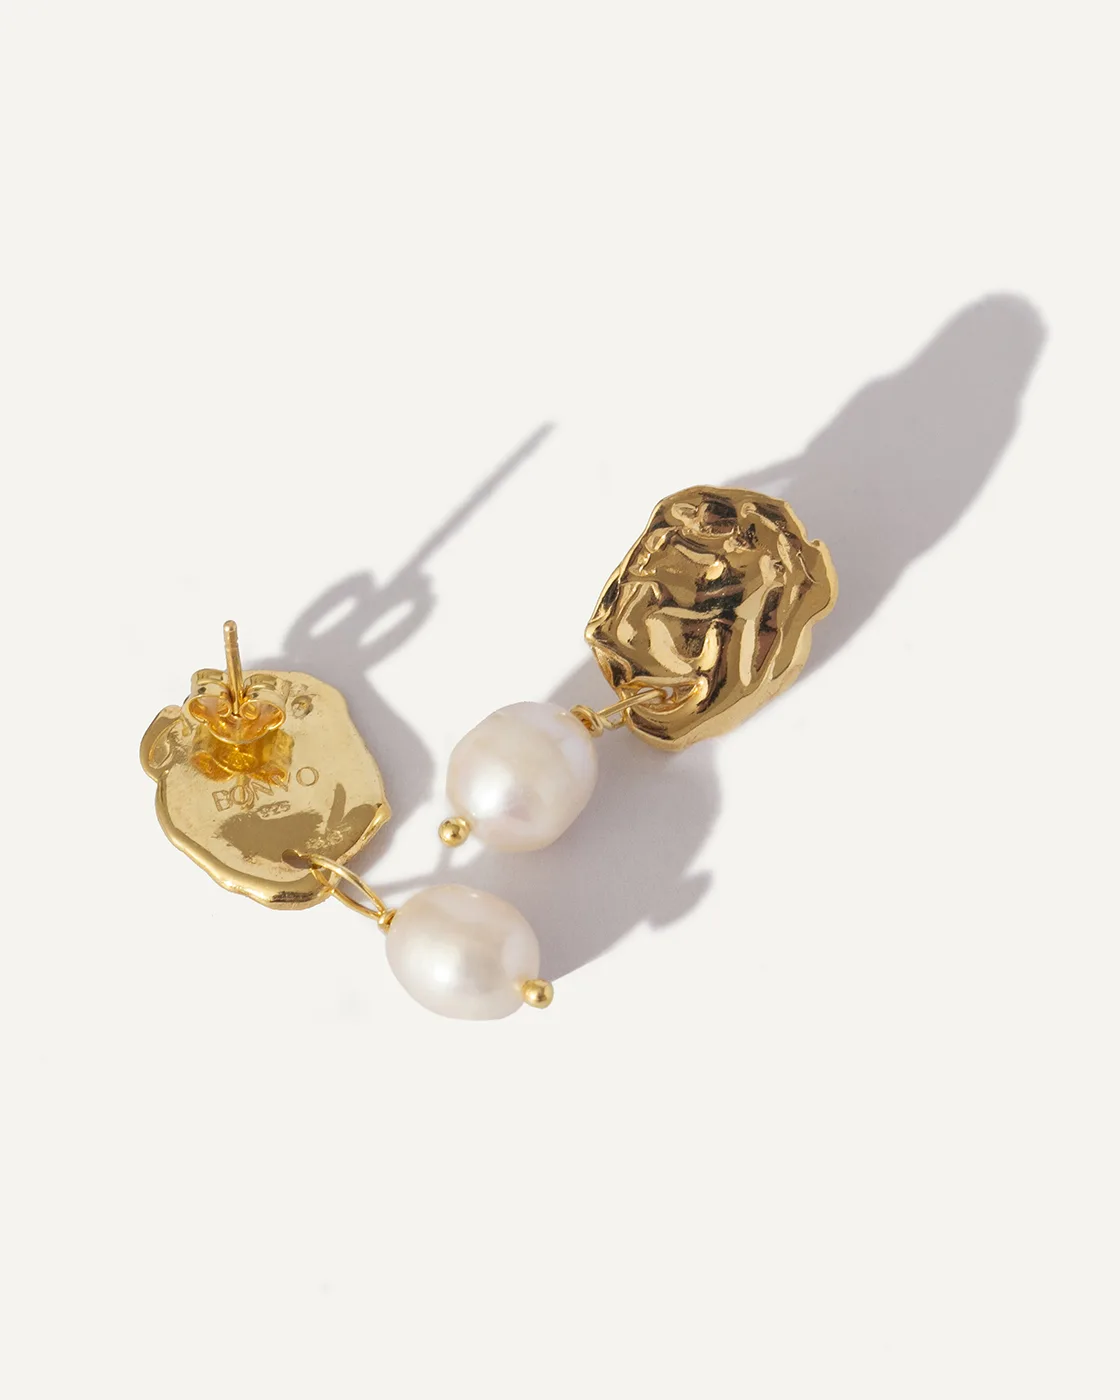 Wake Gold-Plated Sterling Silver Earrings with a Pearl Drop